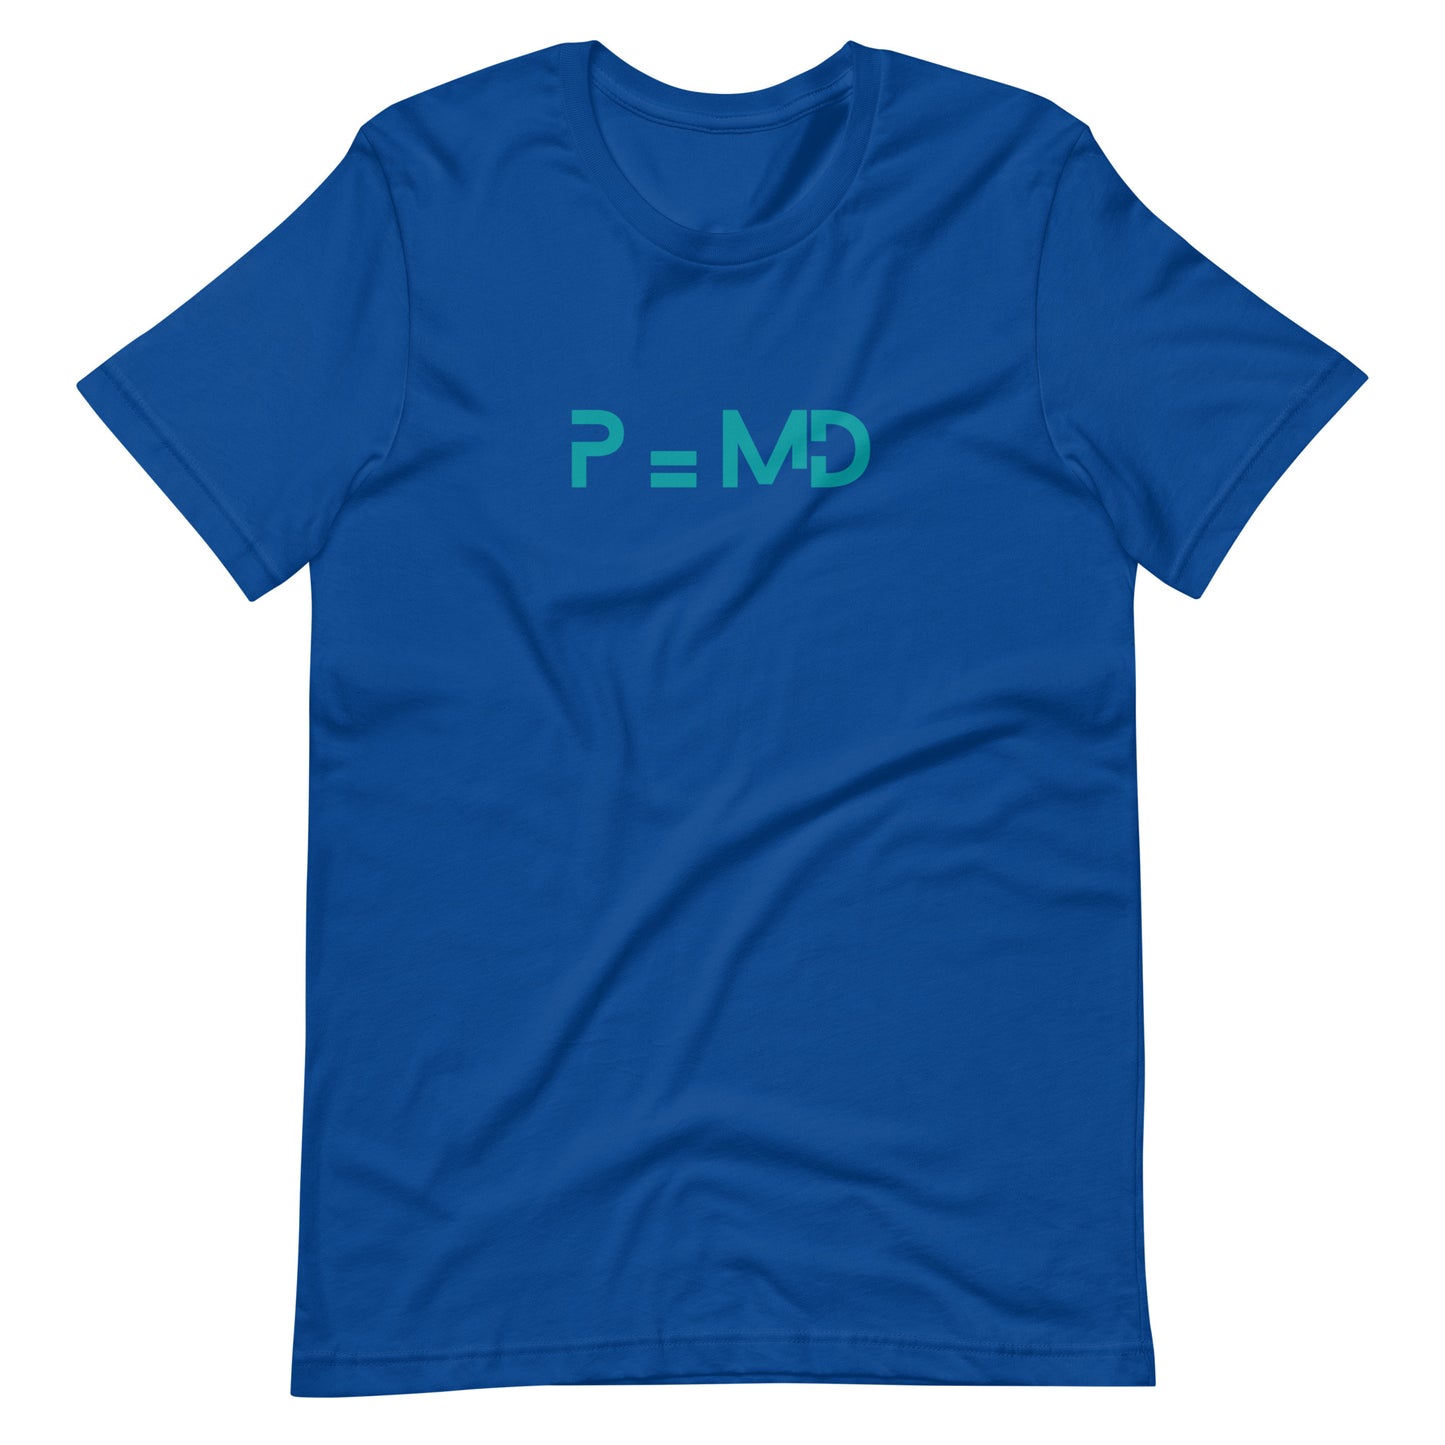 P=MD, Doctor, Physician, Medical Student, Resident, Funny Doctor T-shirt, Medical Shirt